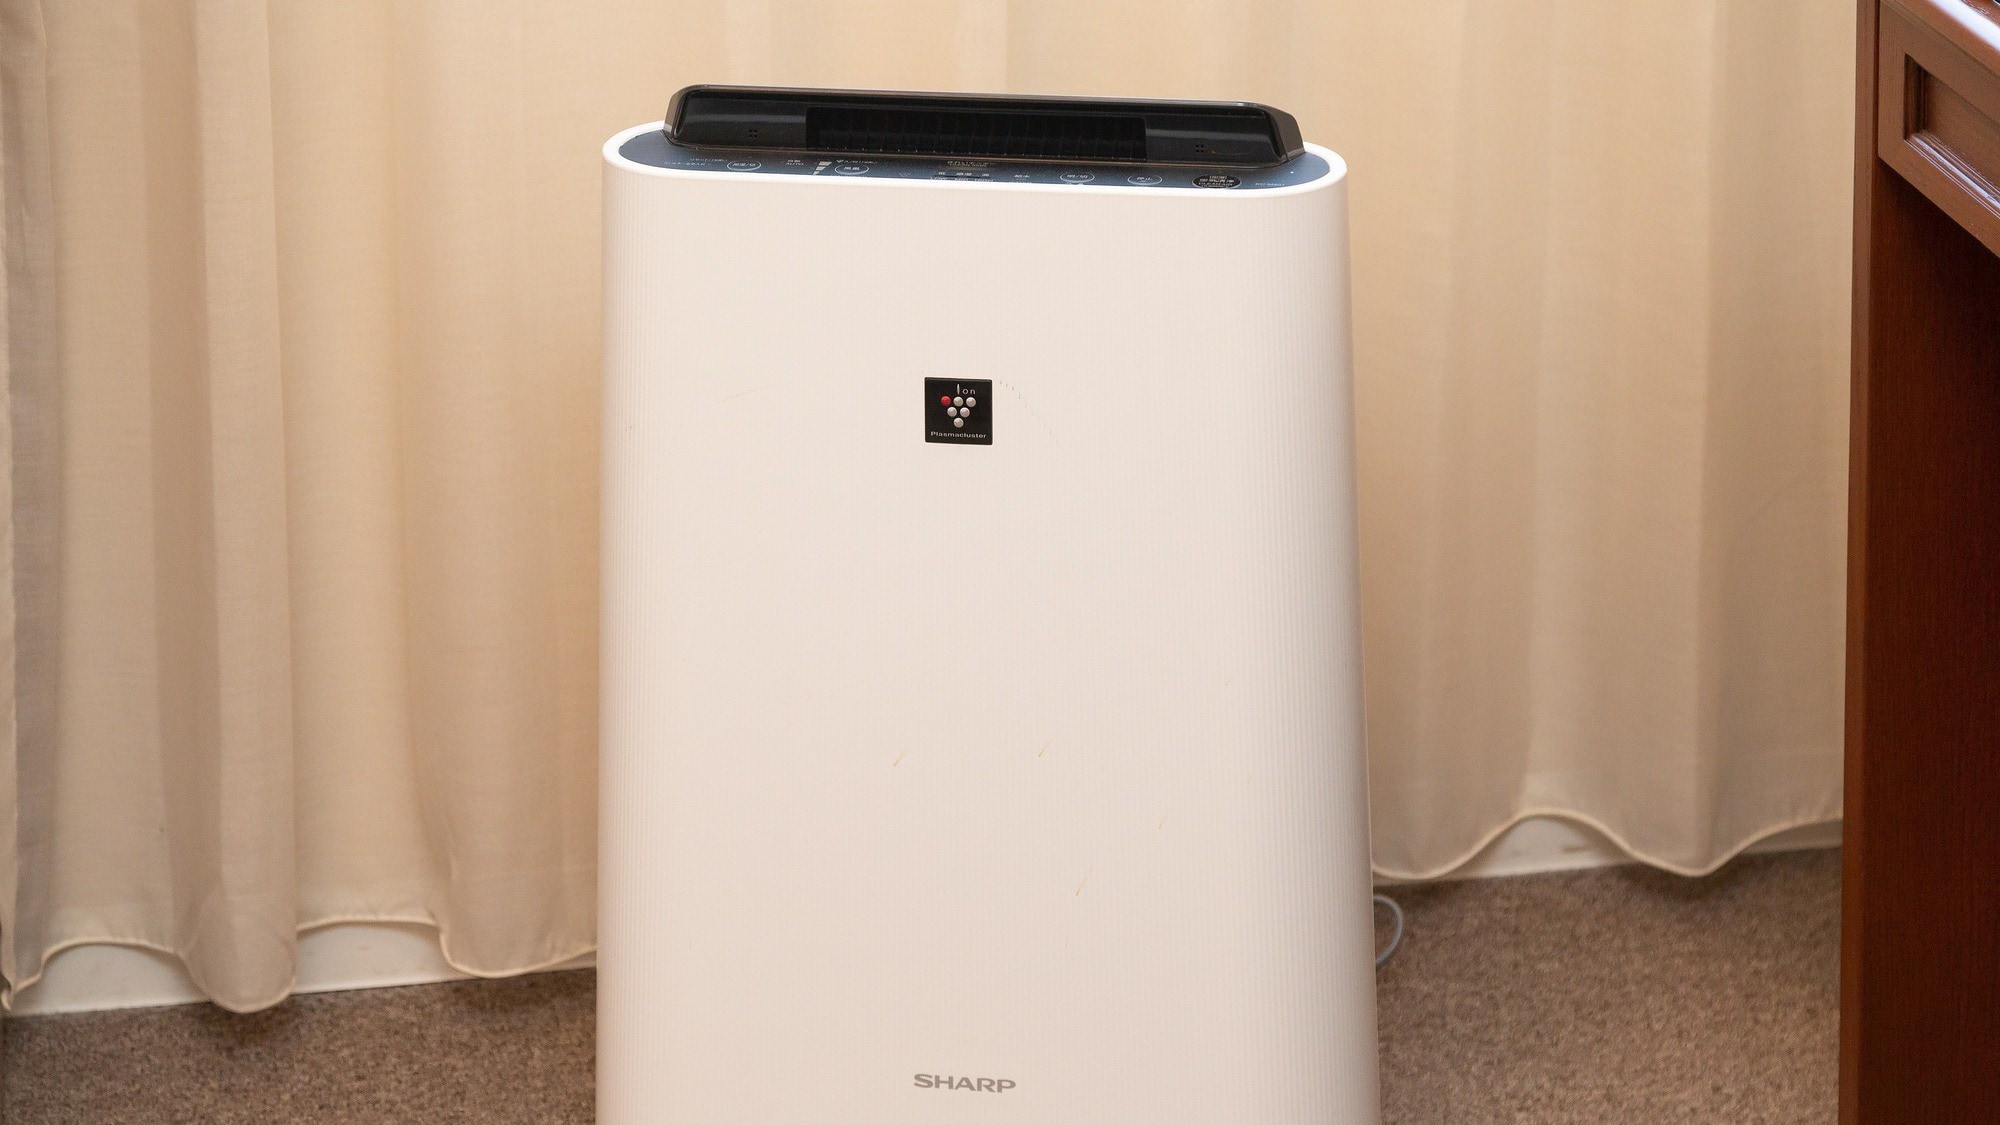 All smoking rooms have a humidifier with an air purifier